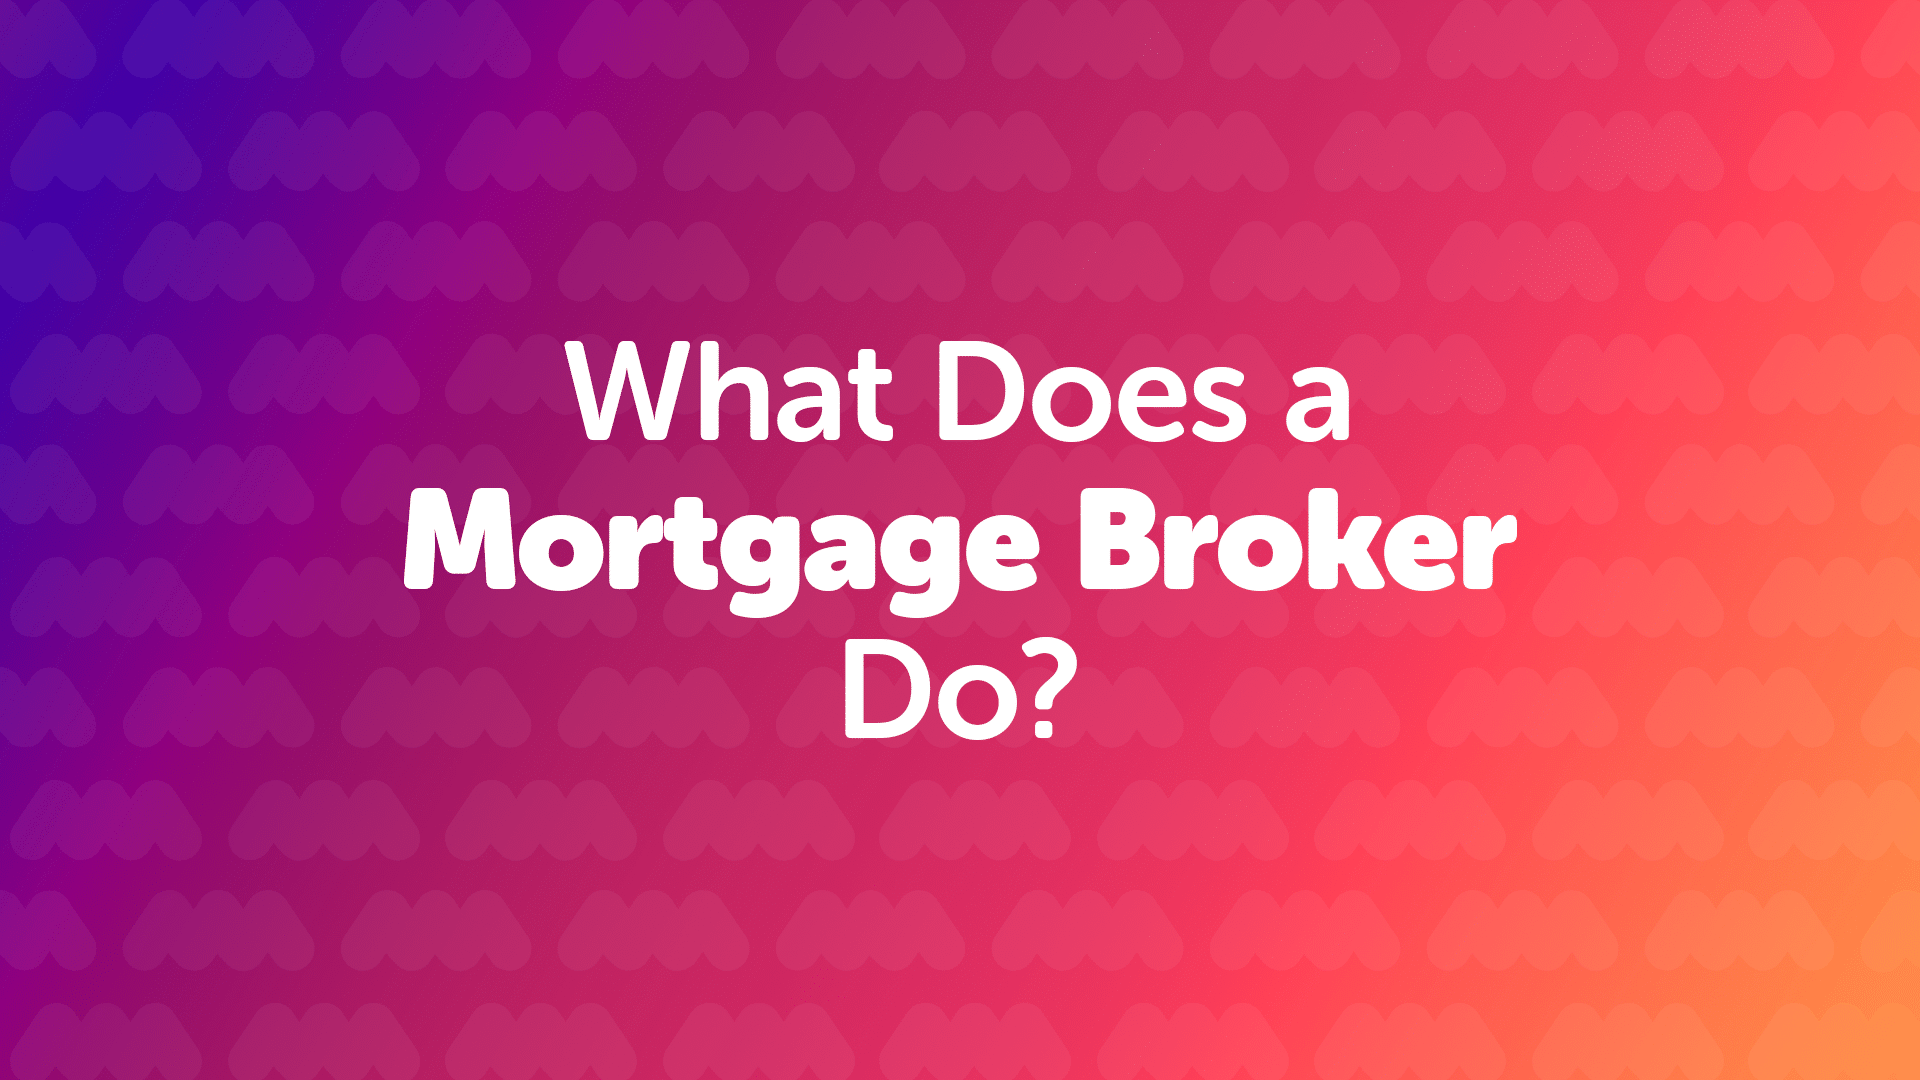 What Does a Mortgage Broker in London do?